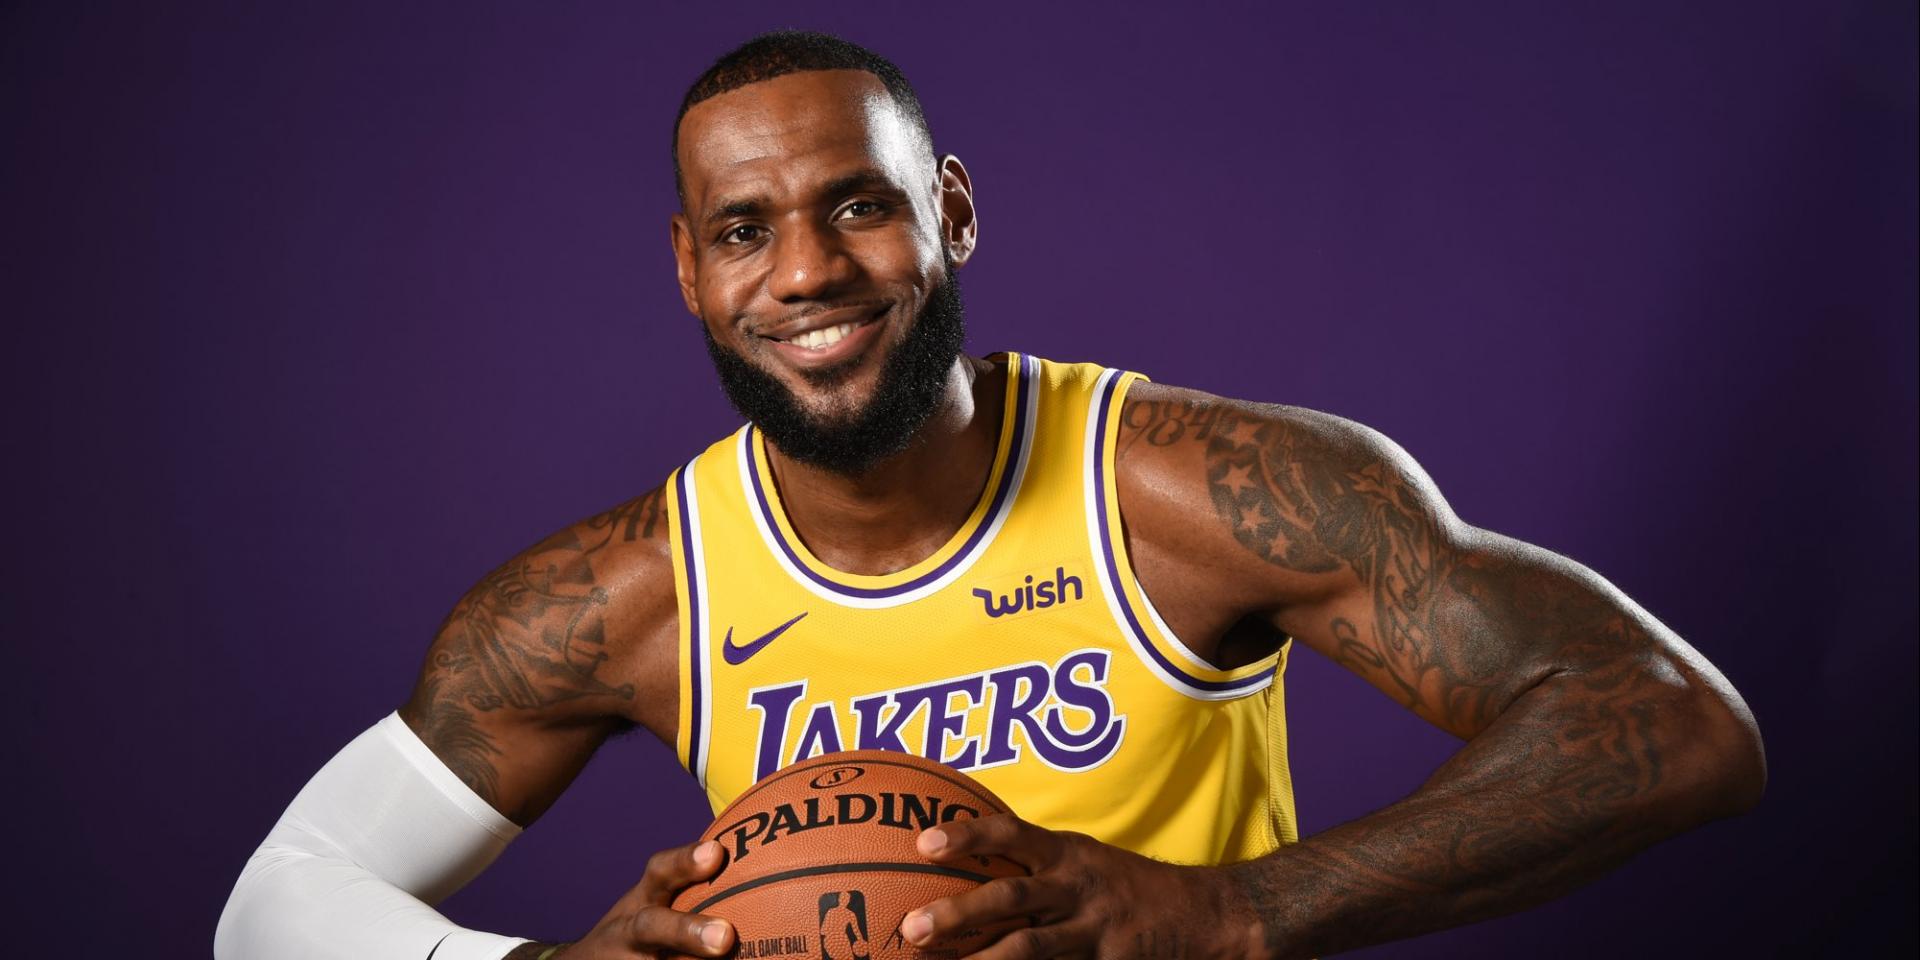 Study Finds LeBron James is the Most Hated Player in the NBA